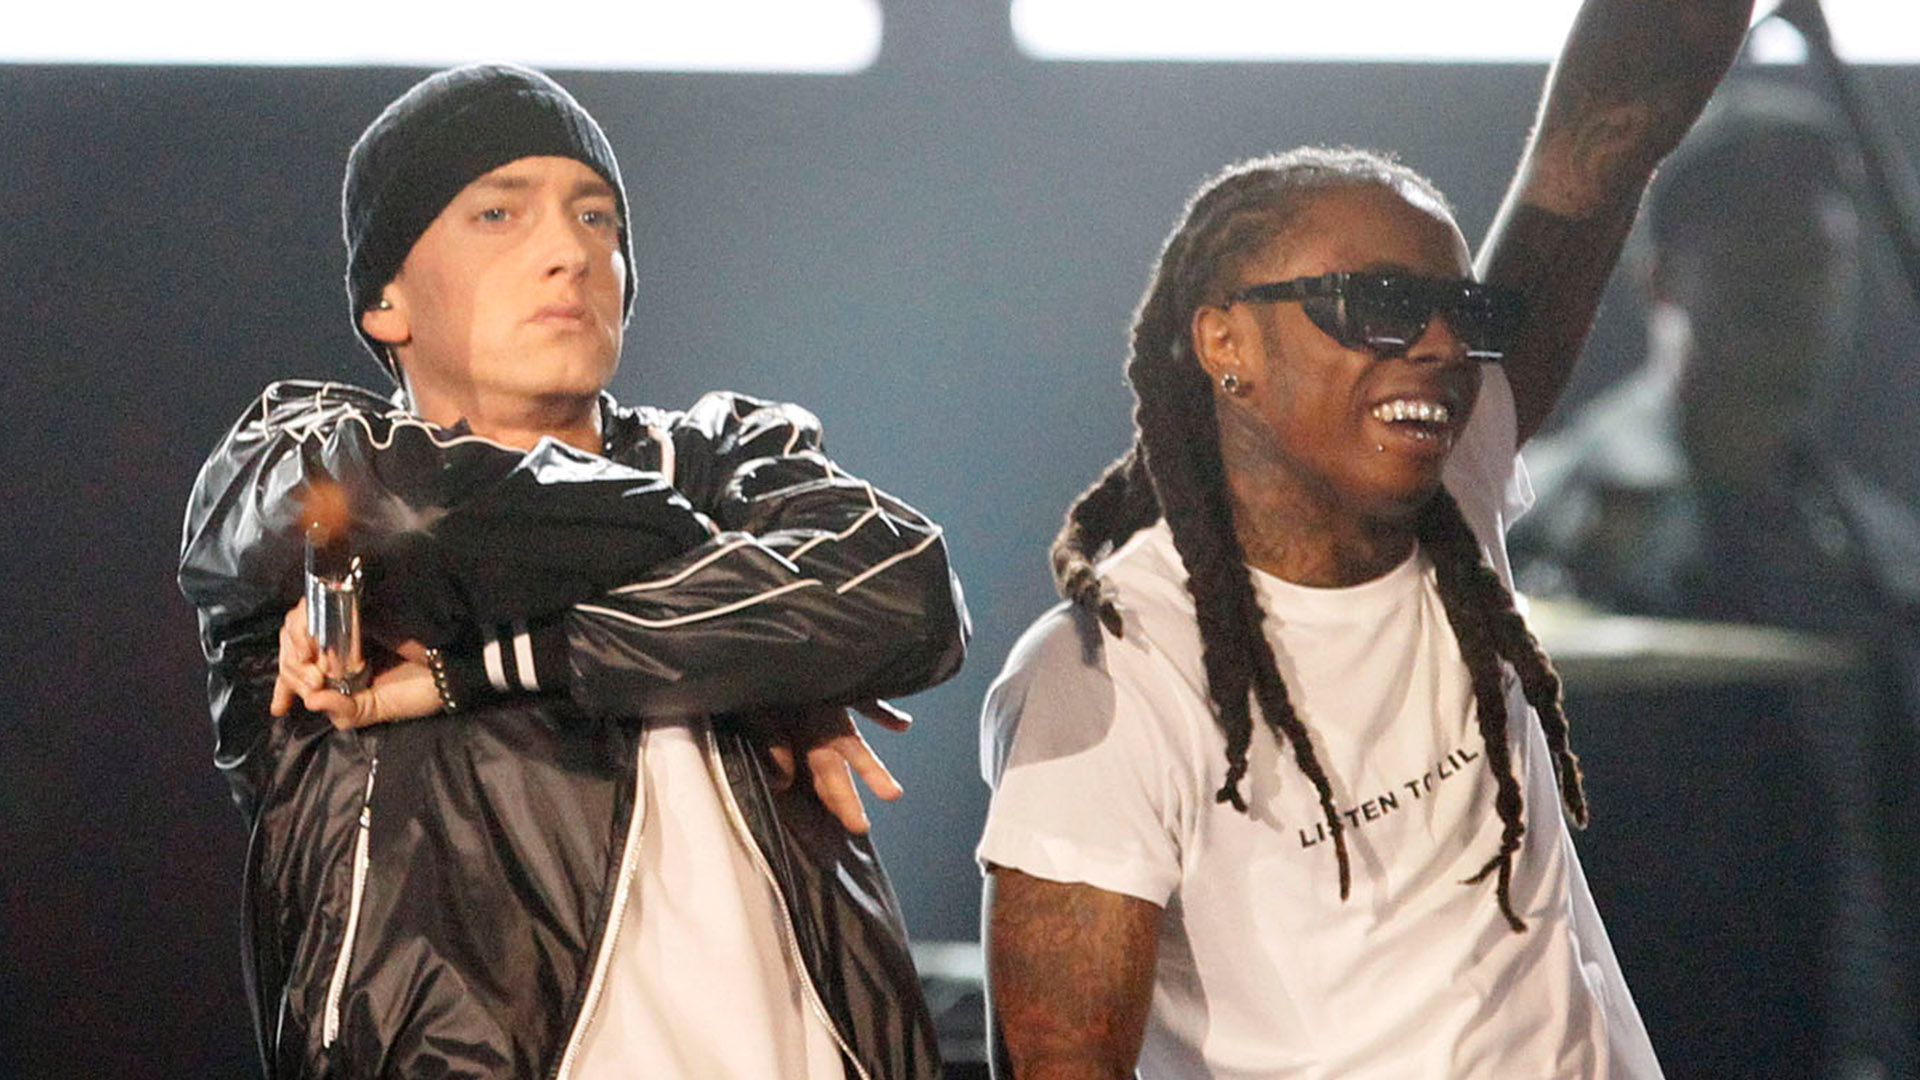 Eminem – “No Love” feat. Lil Wayne Surpassed 500 million views on YouTube |  Eminem.Pro - the biggest and most trusted source of Eminem